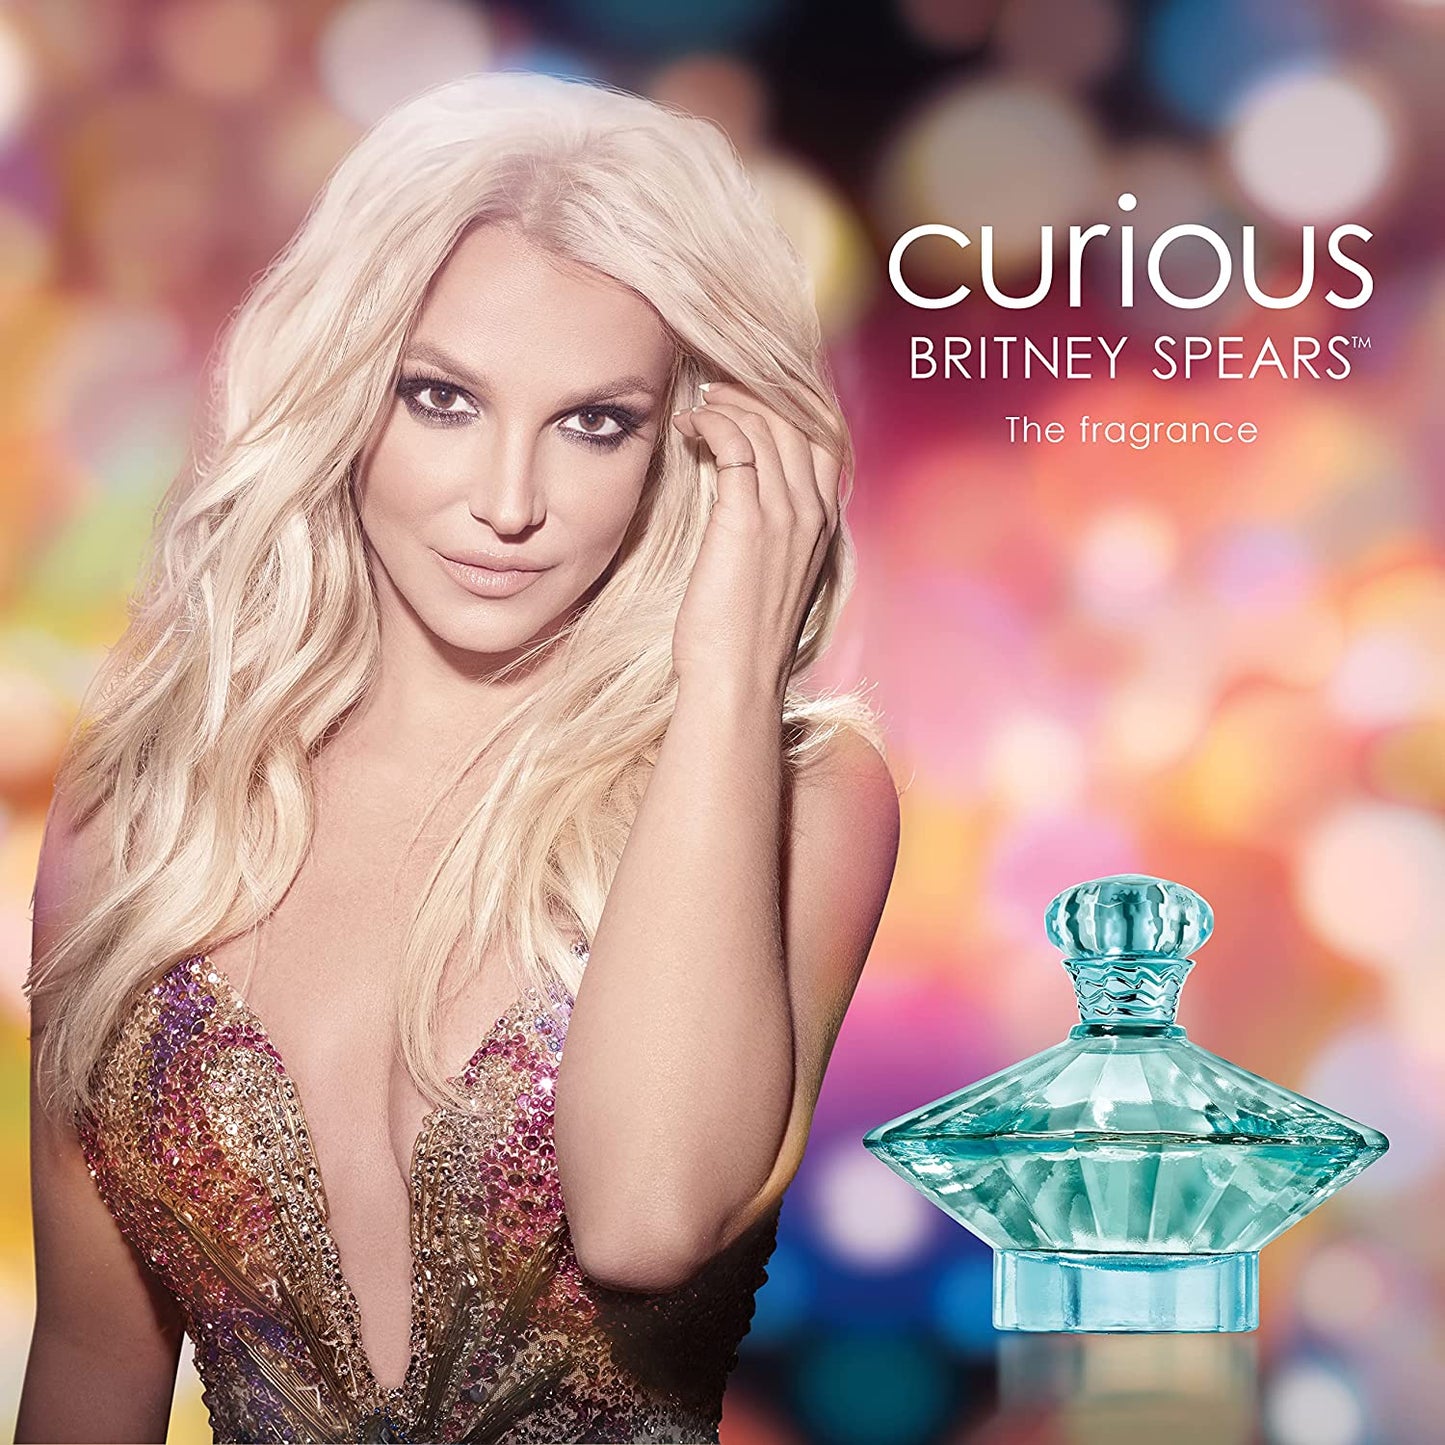 Curious by Britney Spears EDP for women - Perfume Planet 